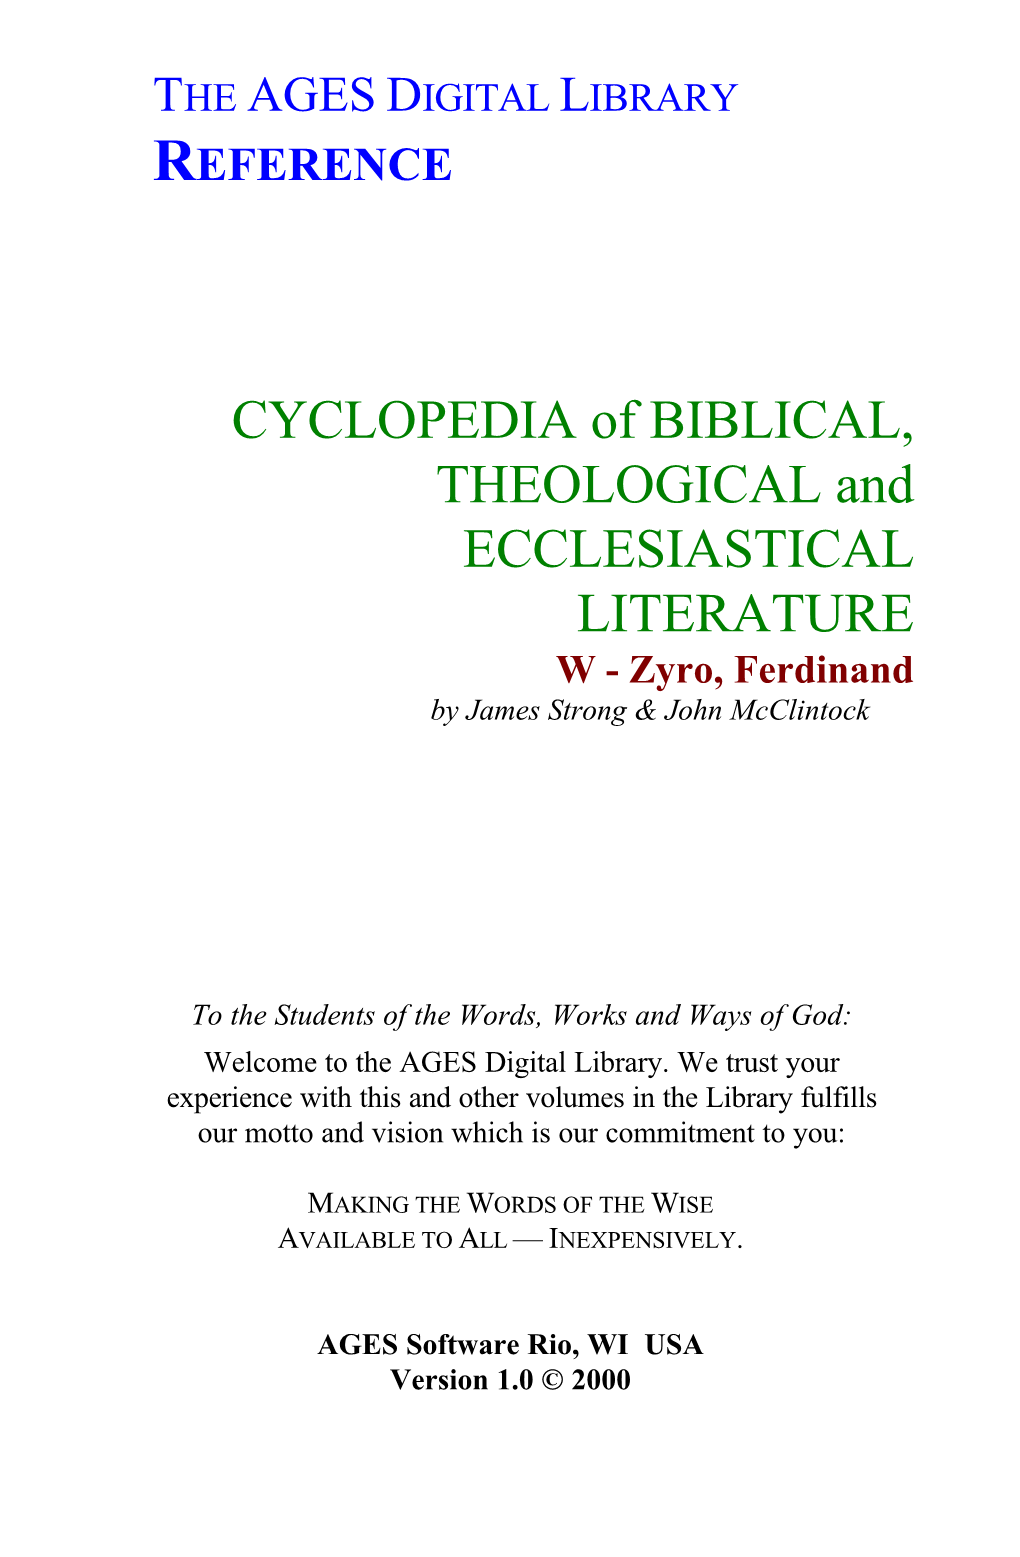 CYCLOPEDIA of BIBLICAL, THEOLOGICAL and ECCLESIASTICAL LITERATURE W - Zyro, Ferdinand by James Strong & John Mcclintock